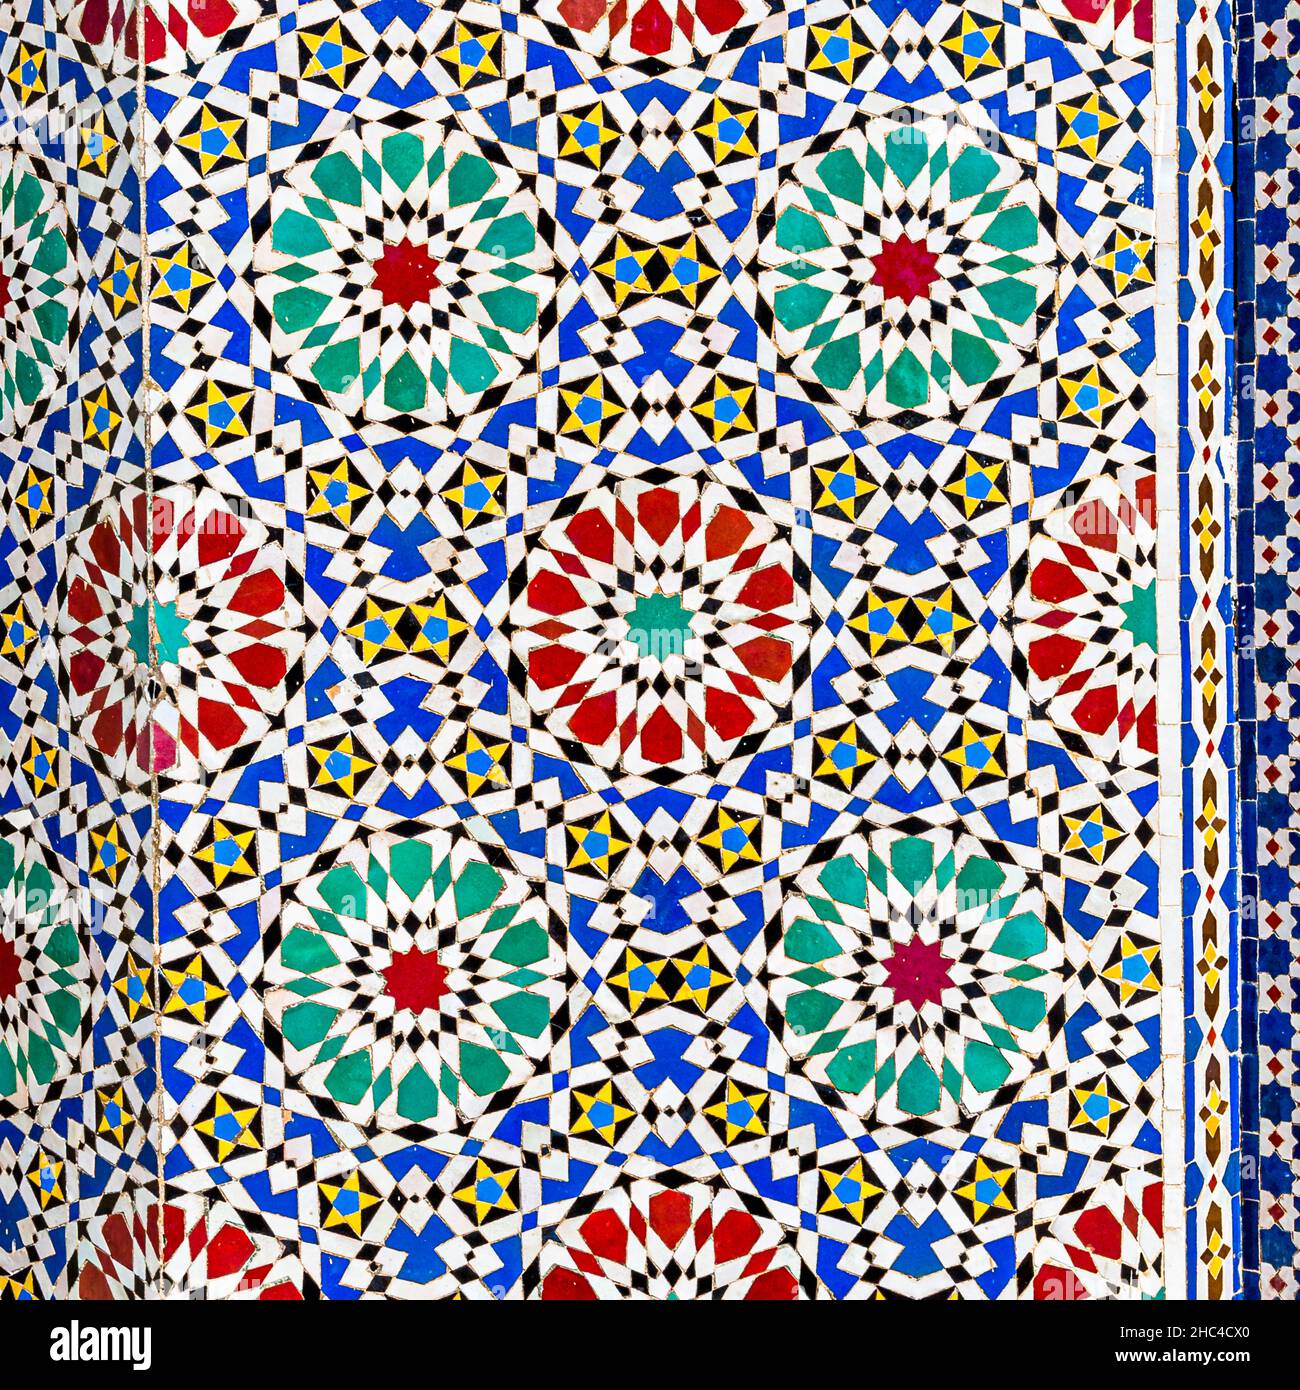 Tile mosaics on the wall of the royal palace in Fès, Oulad Tayeb, Morocco Stock Photo